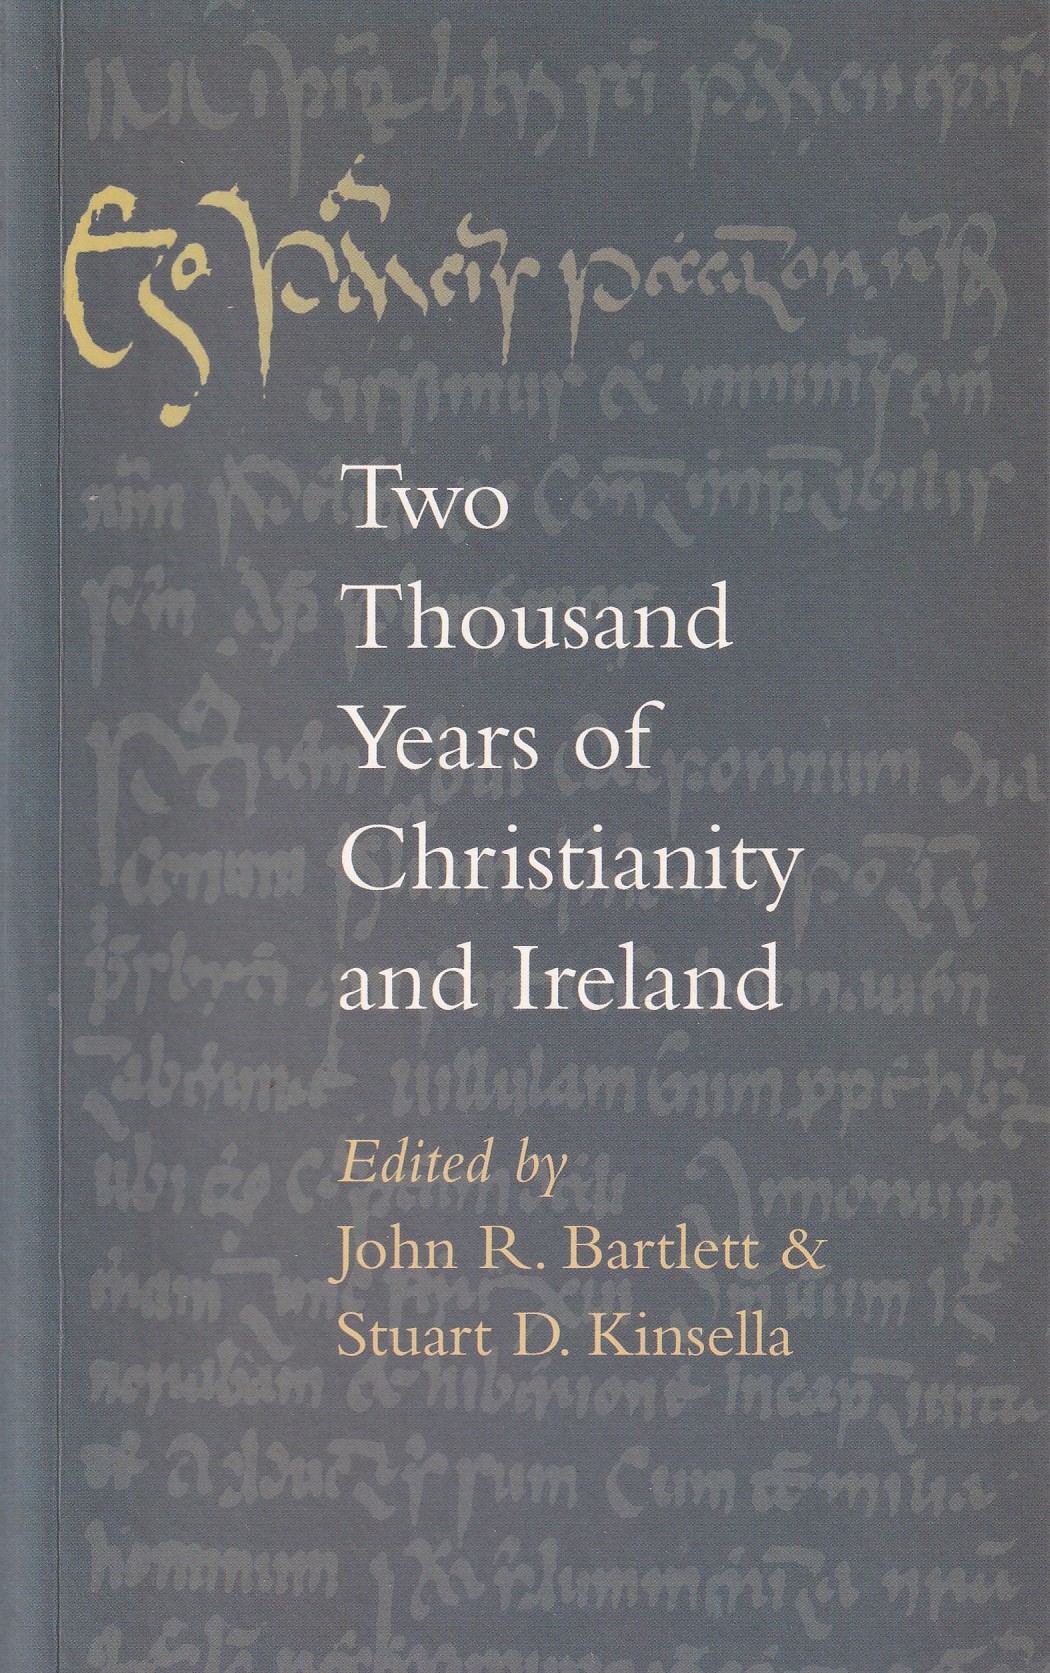 Two Thousand Years of Christianity and Ireland by John R. Bartlett, Stuart D. Kinsella (eds.)